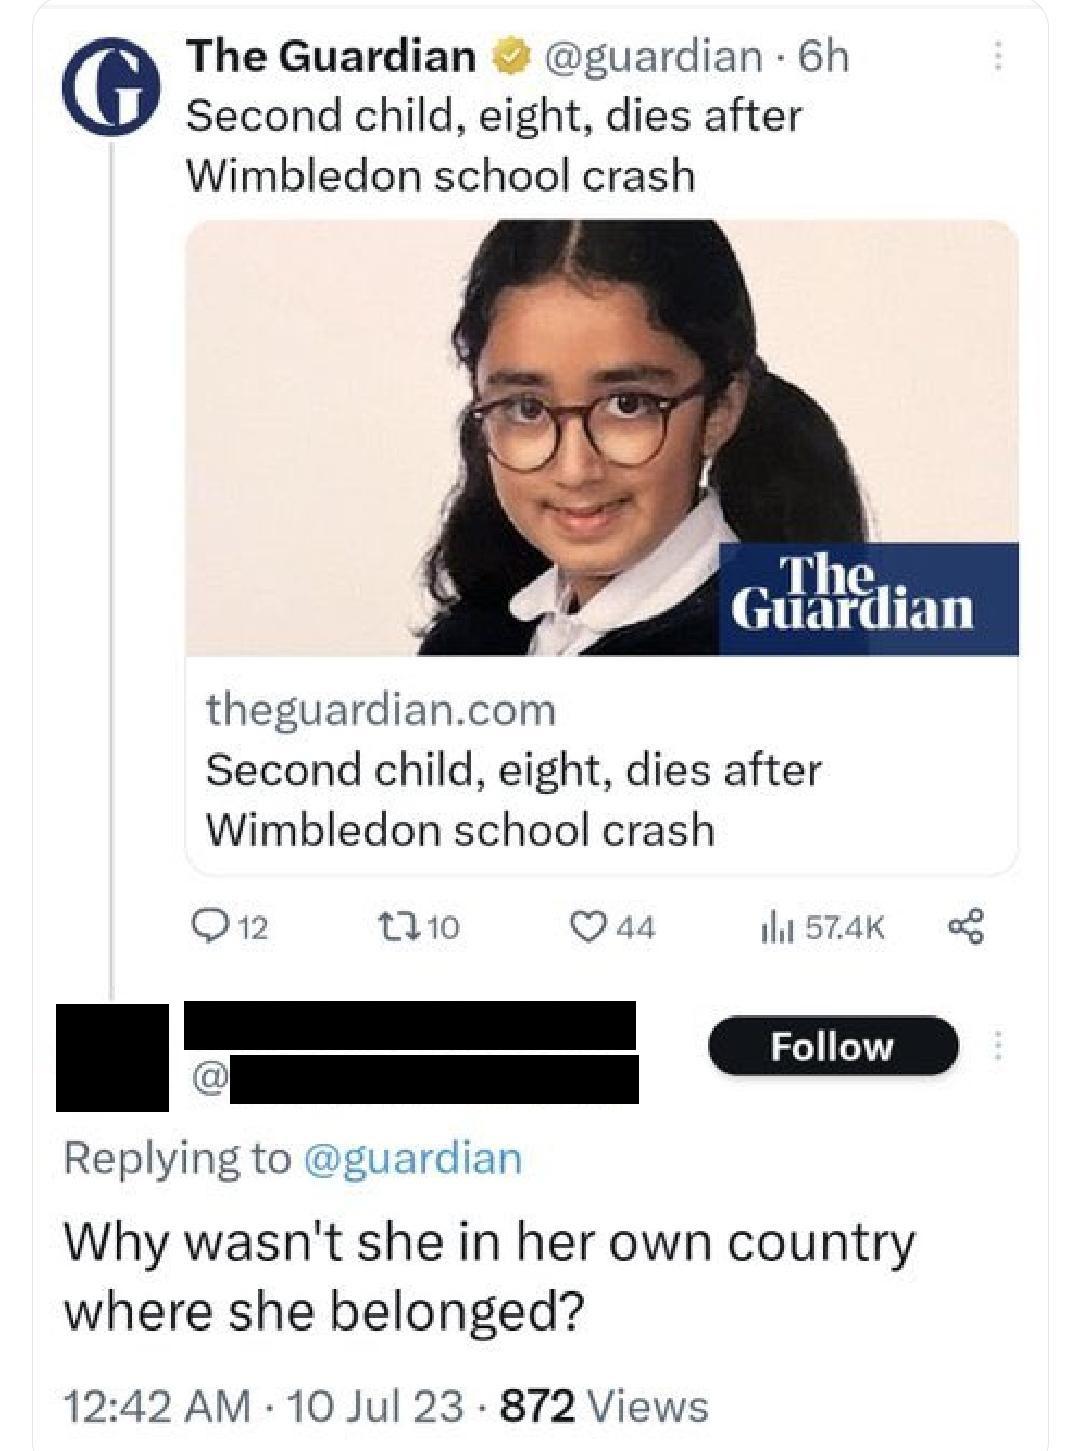 trashy people - hermione chapman - G The Guardian 6h Second child, eight, dies after Wimbledon school crash theguardian.com Second child, eight, dies after Wimbledon school crash 12 t10 44 # The Guardian 10 Jul 23 872 Views ili Why wasn't she in her own c